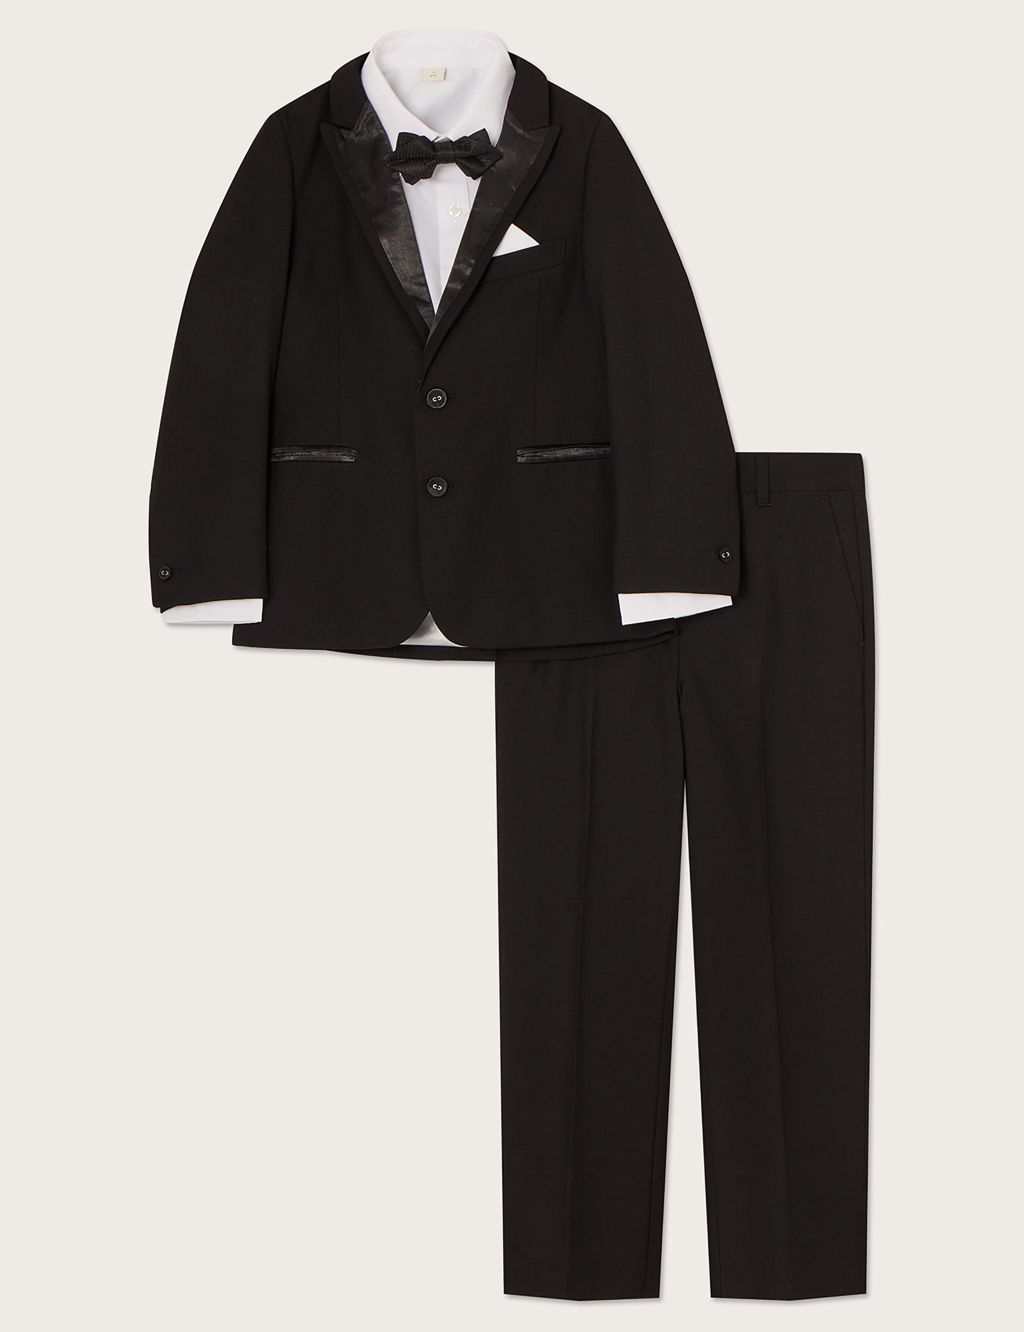 4pc Tuxedo Suit Outfit (6 Mths-14 Yrs) image 1